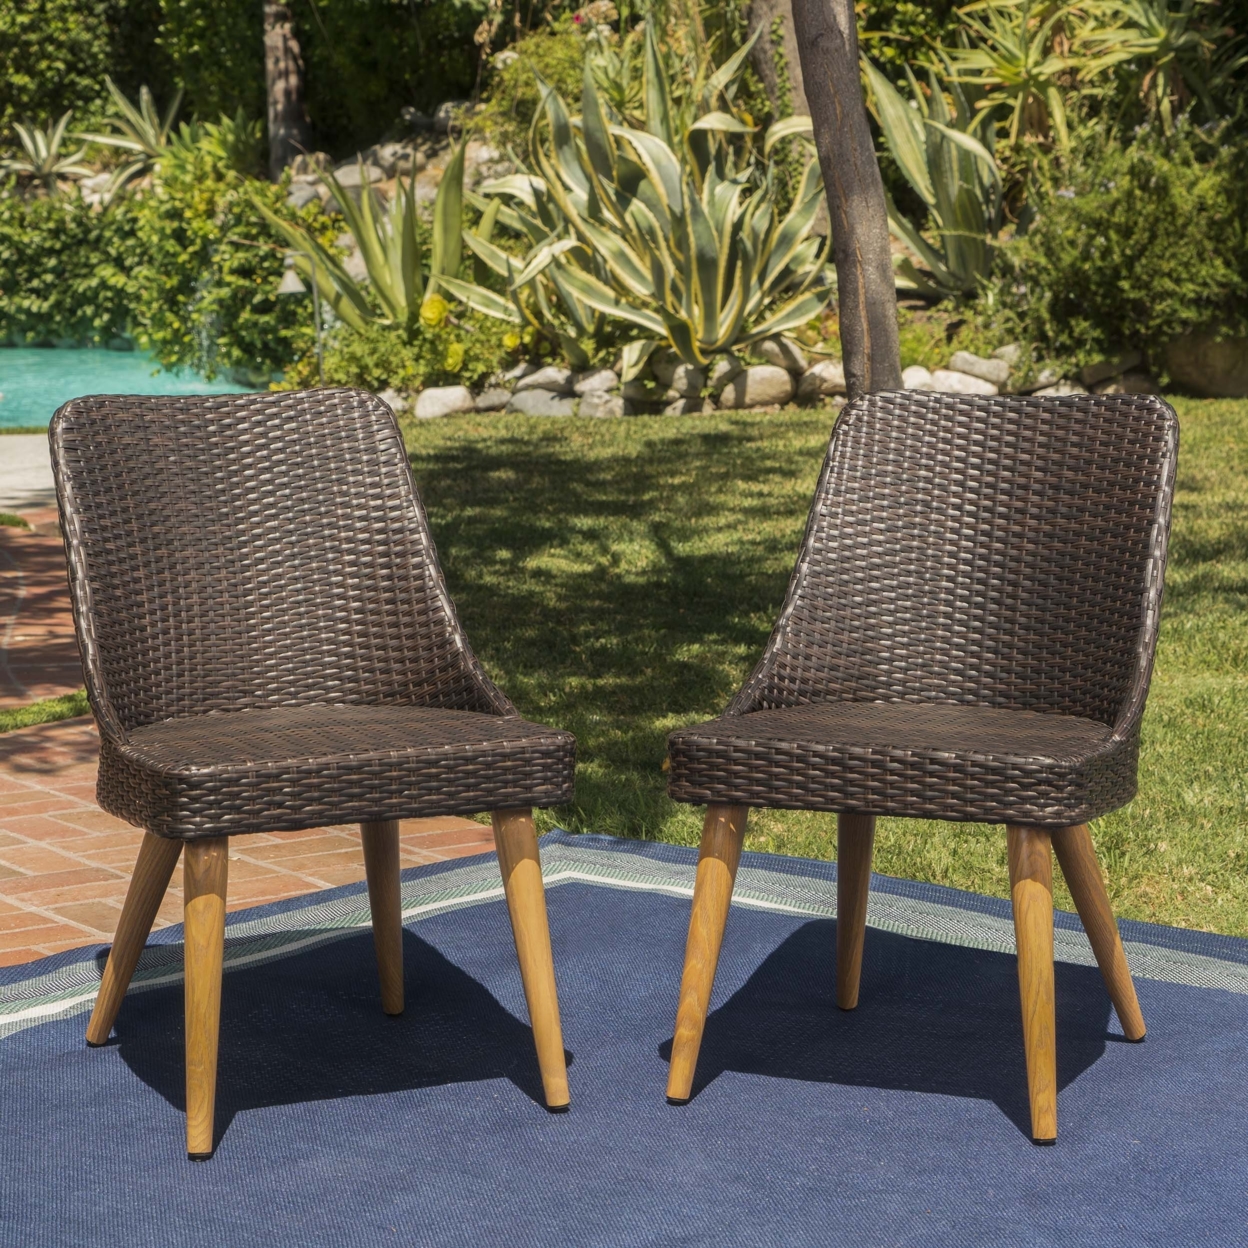 Desmond Outdoor Wicker Dining Chairs With Wood Finished Metal Legs (Set Of 2)